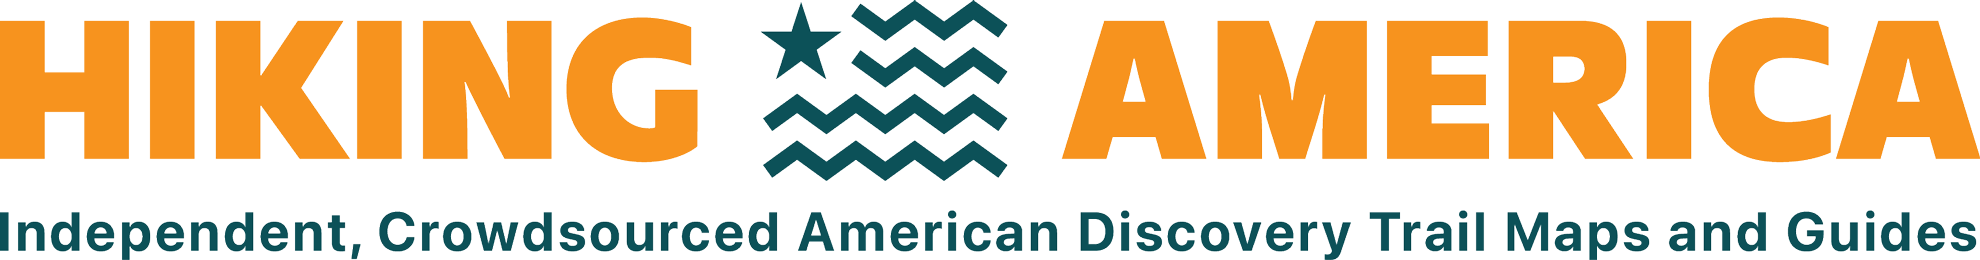 Hiking America, independent, Crowdsourced American Discovery Trail Maps and guides